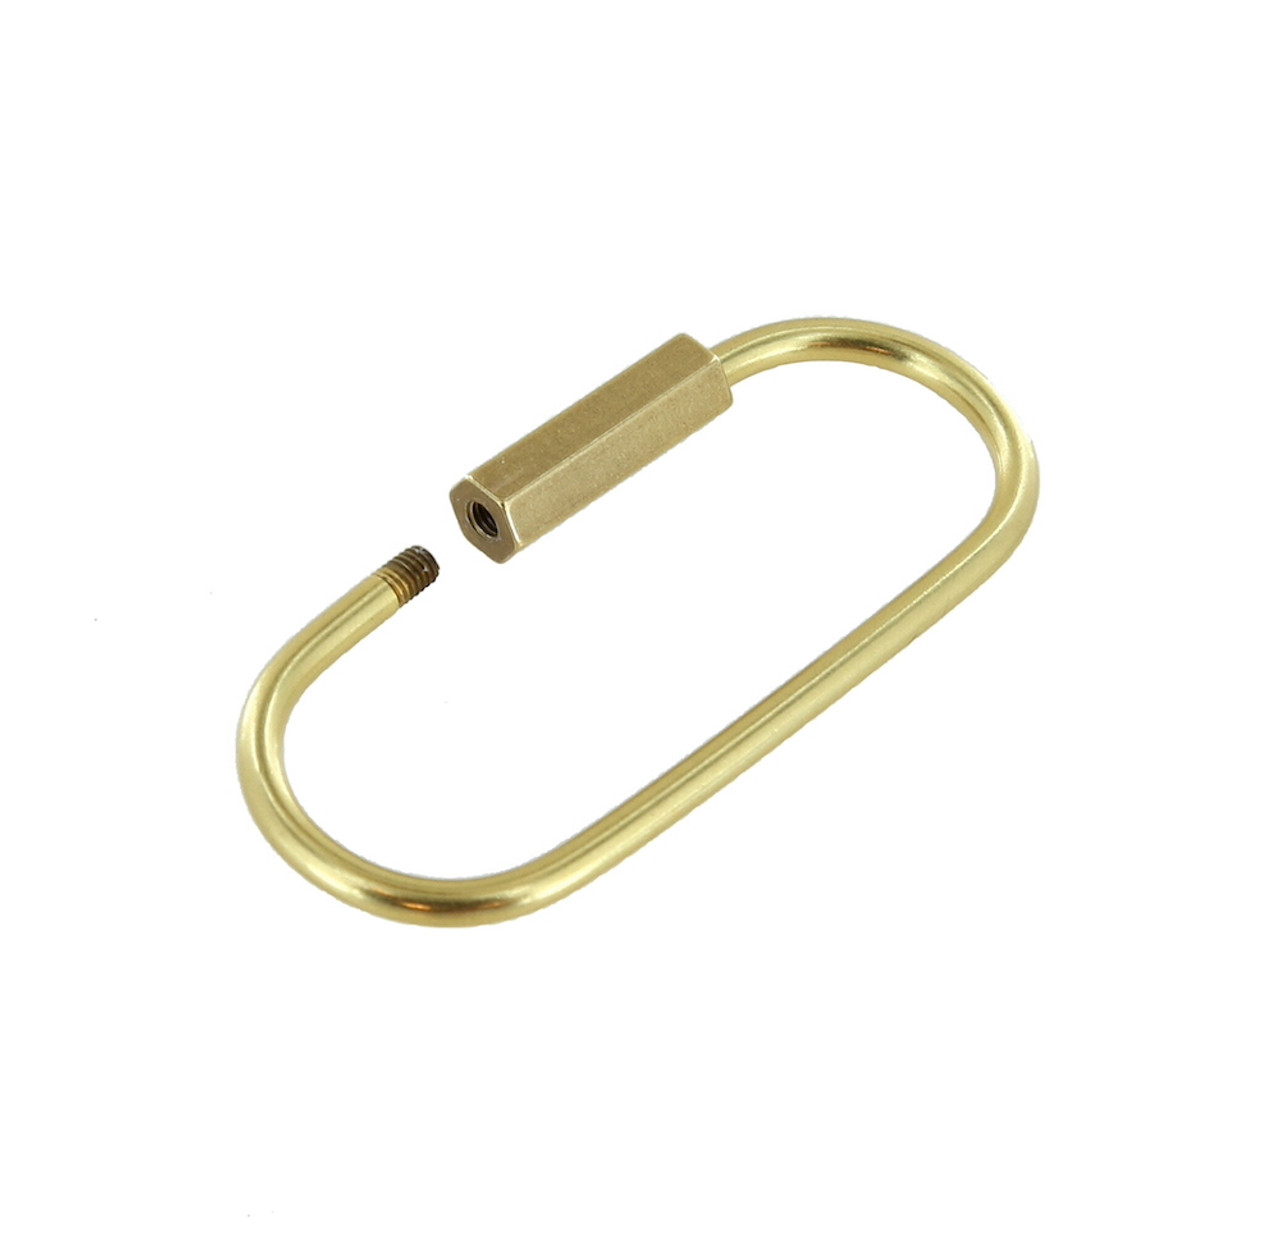 Buttonworks Revolving Brass Key Ring - Acquire